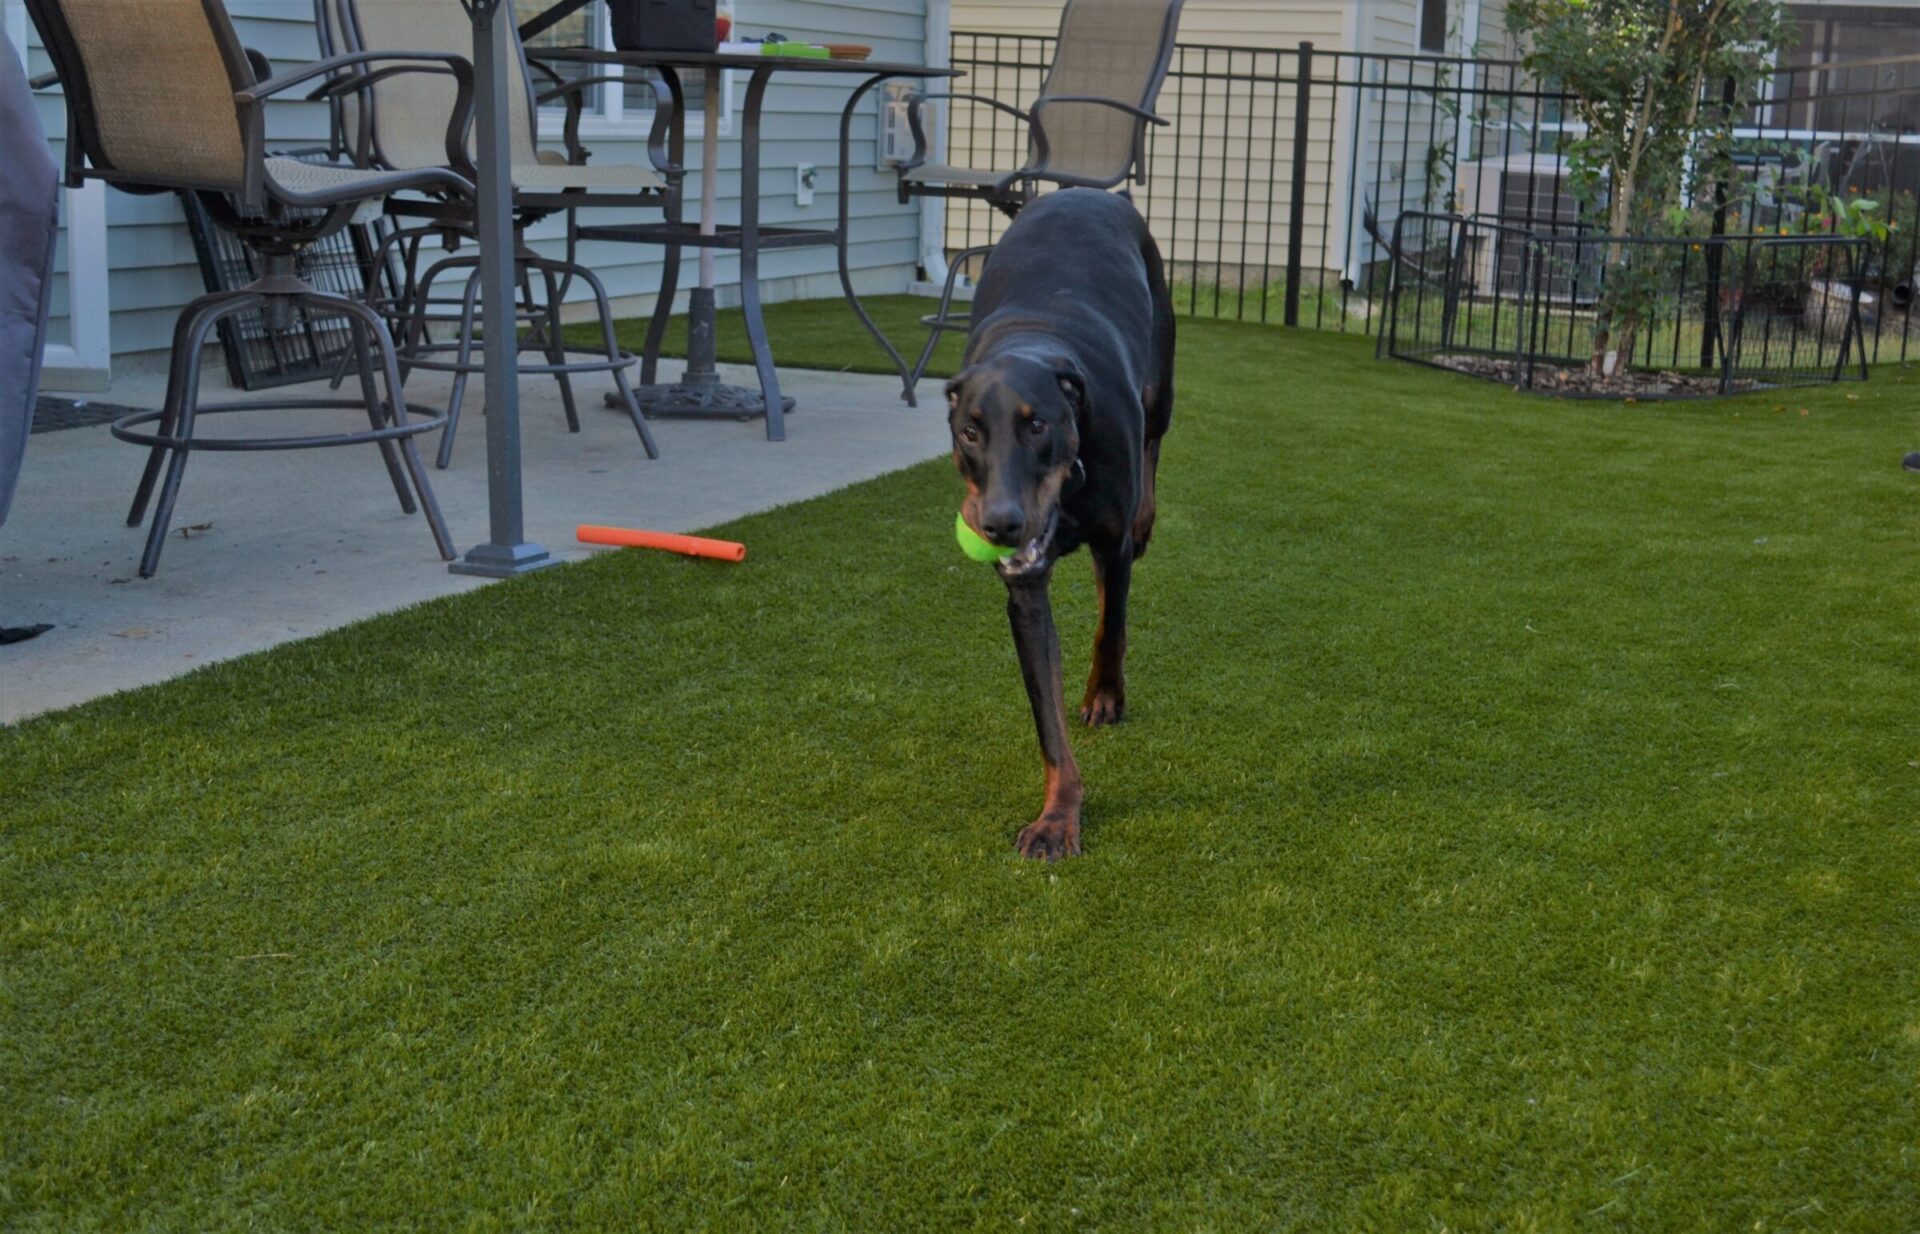 A black dog with a tennis ball in its mouth walks across a lush green lawn with patio furniture in the background and a frisbee on the ground.